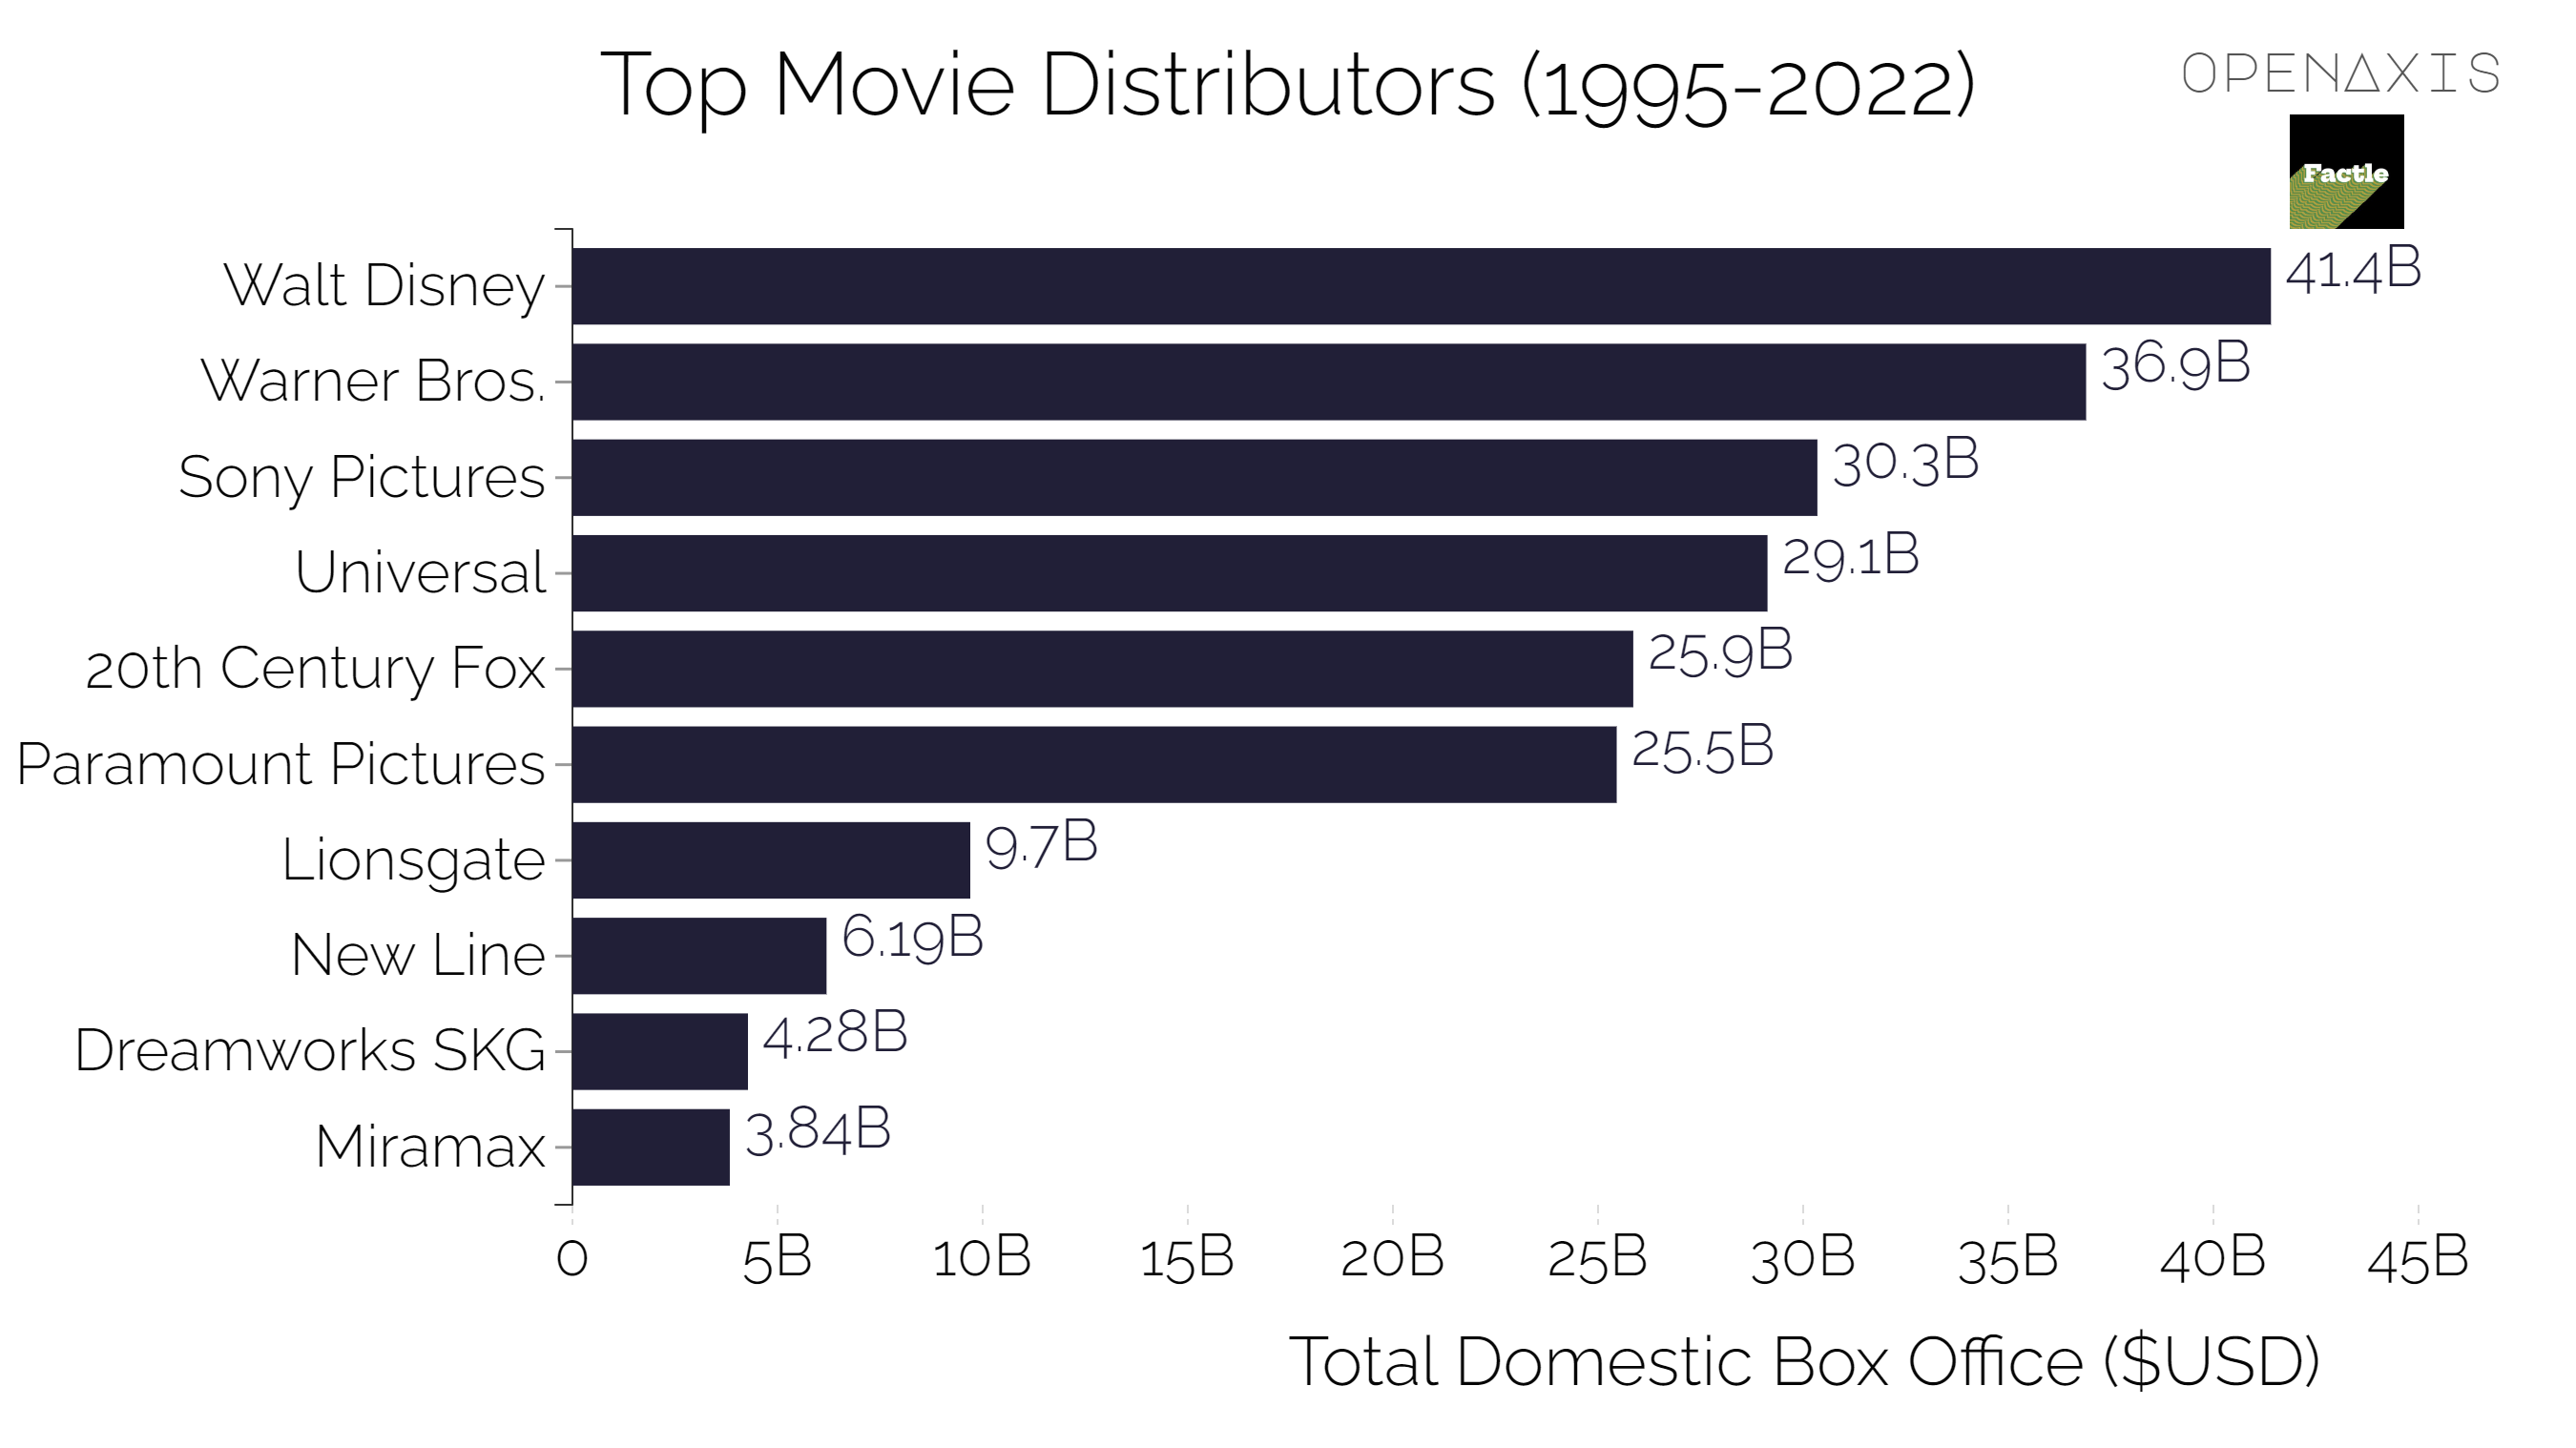 <p>The top movie distributors have had a long staying power since 1995. That year, the top 5 distributors (ranked from first to fifth) were Walt Disney, Warner Bros, Sony Pictures, Universal, and Paramount. In 2021, the top 5 distributors were Sony Pictures, Walt Disney, Universal, Warner Bros, and United Artists. Not much has changed!</p><p><br /></p><p>This dataset ranks the top movie distributors throughout 1995-2022 by the cumulative amount they earned at the domestic box office during that time period. Walt Disney, over the past 27 years, holds the top spot with 17% market share during this period.</p><p><br /></p><p><span data-index="0" data-denotation-char data-id="0" data-value="&lt;a href=&quot;/search?q=%23entertainment&quot; target=_self&gt;#entertainment" data-link="/search?q=%23entertainment">﻿<span contenteditable="false"><span></span><a href="/search?q=%23entertainment" target="_self">#entertainment</a></span>﻿</span> <span data-index="0" data-denotation-char data-id="0" data-value="&lt;a href=&quot;/search?q=%23media&quot; target=_self&gt;#media" data-link="/search?q=%23media">﻿<span contenteditable="false"><span></span><a href="/search?q=%23media" target="_self">#media</a></span>﻿</span></p><p><br /></p><p>Source: <a href="/data/3988" target="_blank">The Numbers</a></p><p><br /></p>